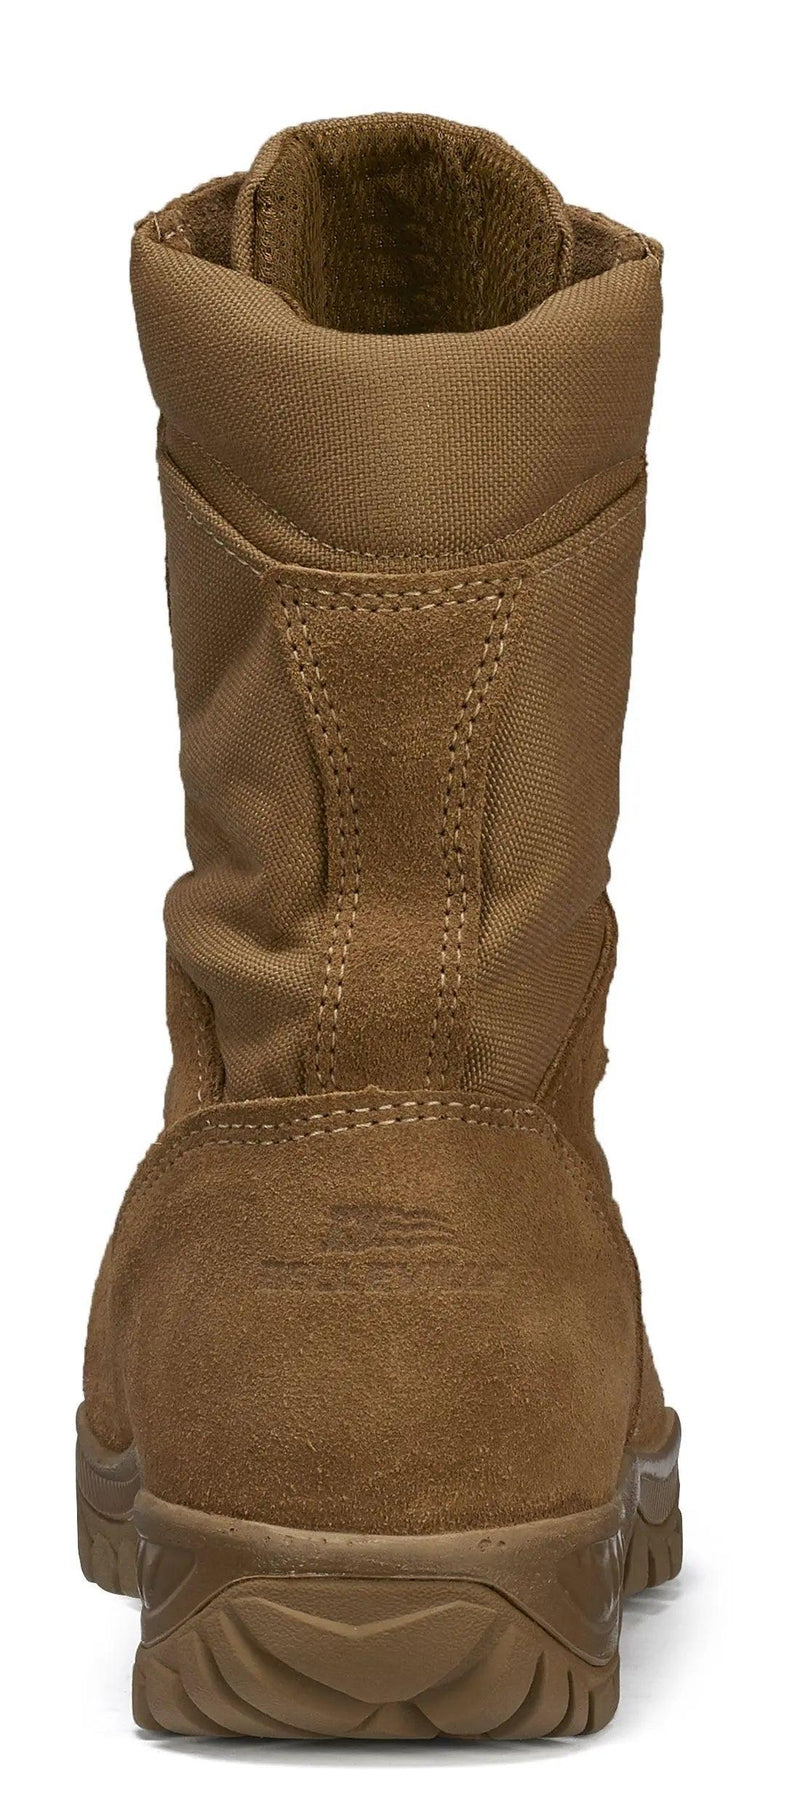 Belleville Hot Weather Steel Toe Tactical Boot C312 ST - BootSolution